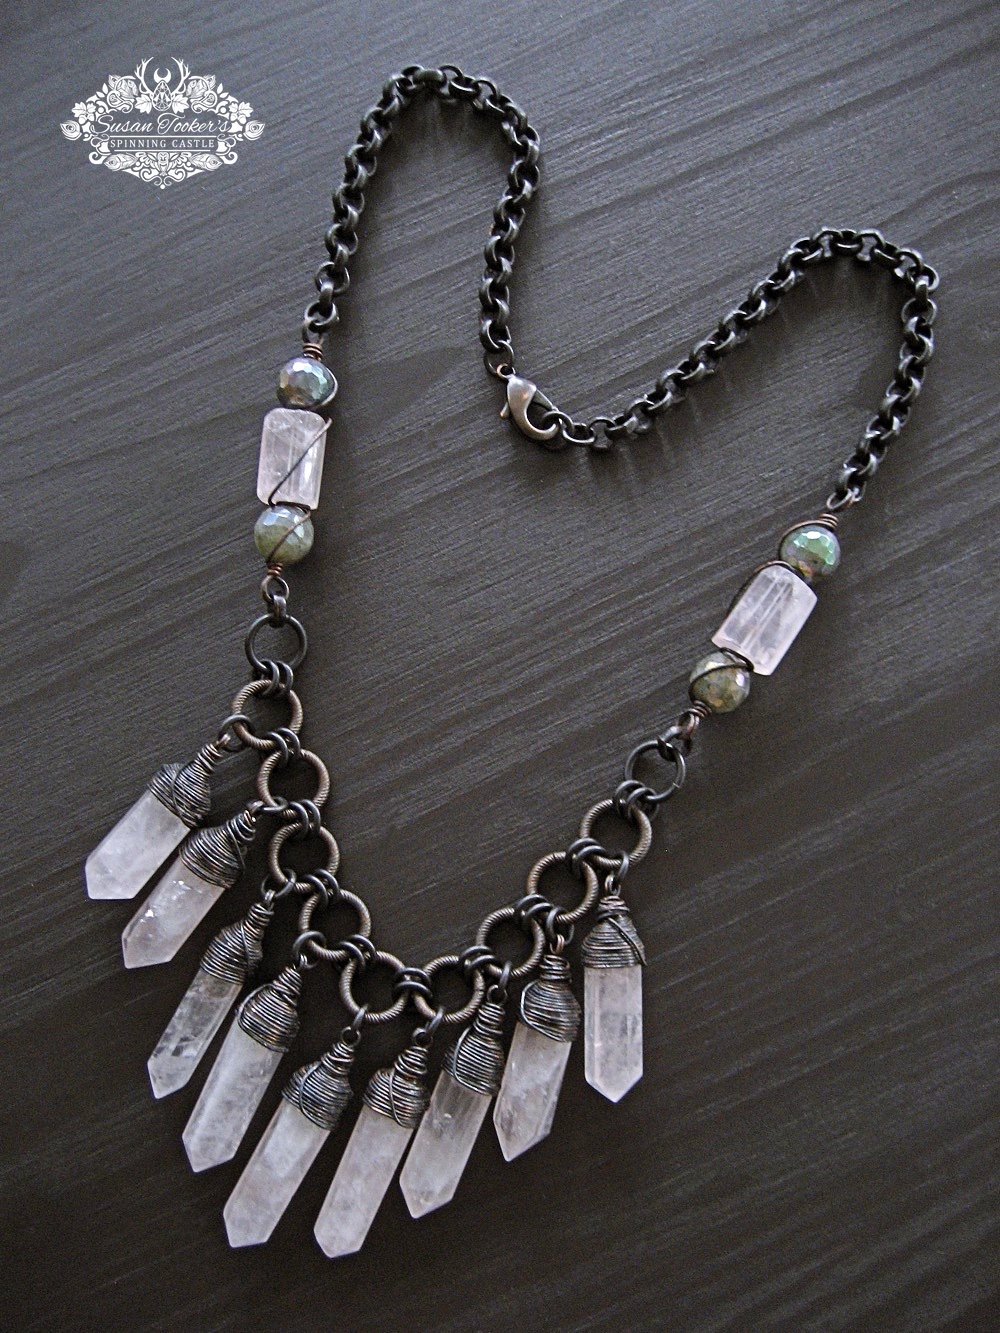 Image of LOVE GODDESS Rose Quartz Crystal Points Labradorite Statement Necklace Boho Witchy Rustic Jewelry 